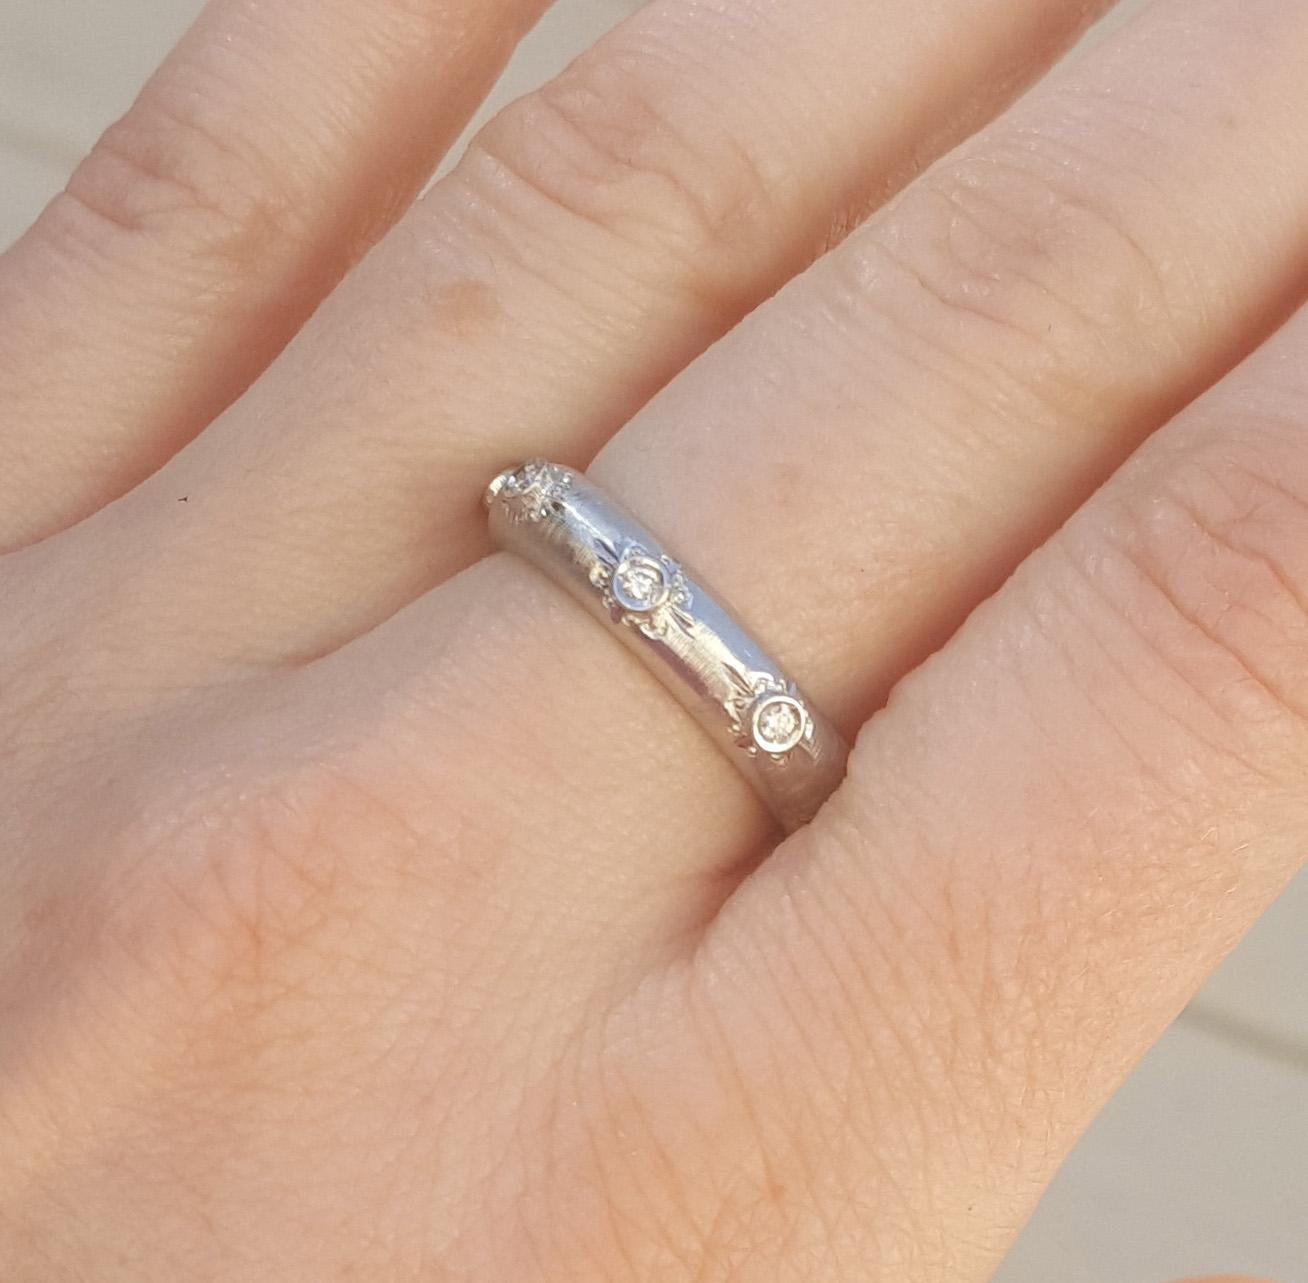 Adriana is an utterly modern ring, with old world sensibilities. The diamonds in clean bezel settings stand out against the delicately engraved surface of the band.

This is an eternity style of diamond band, and it's a great size either on its own